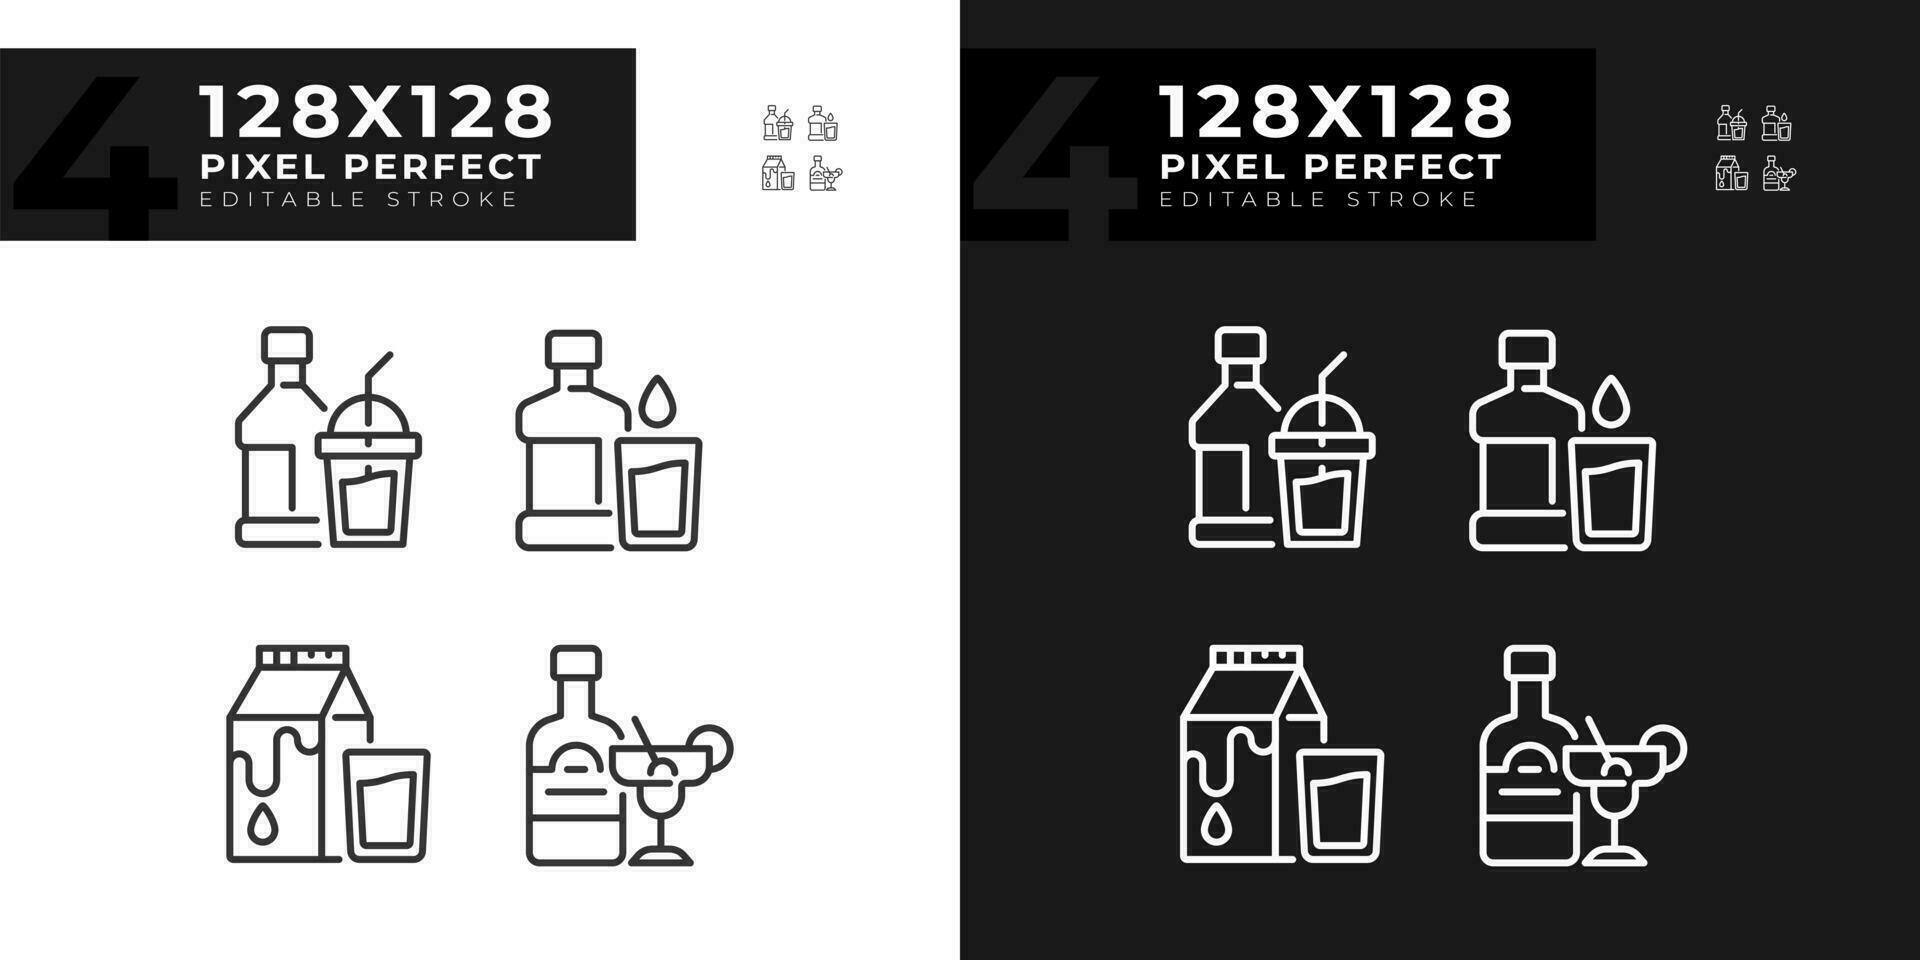 Bottled beverages pixel perfect linear icons set for dark, light mode. Alcohol and soft drinks. Liquid refreshments. Thin line symbols for night, day theme. Isolated illustrations. Editable stroke vector